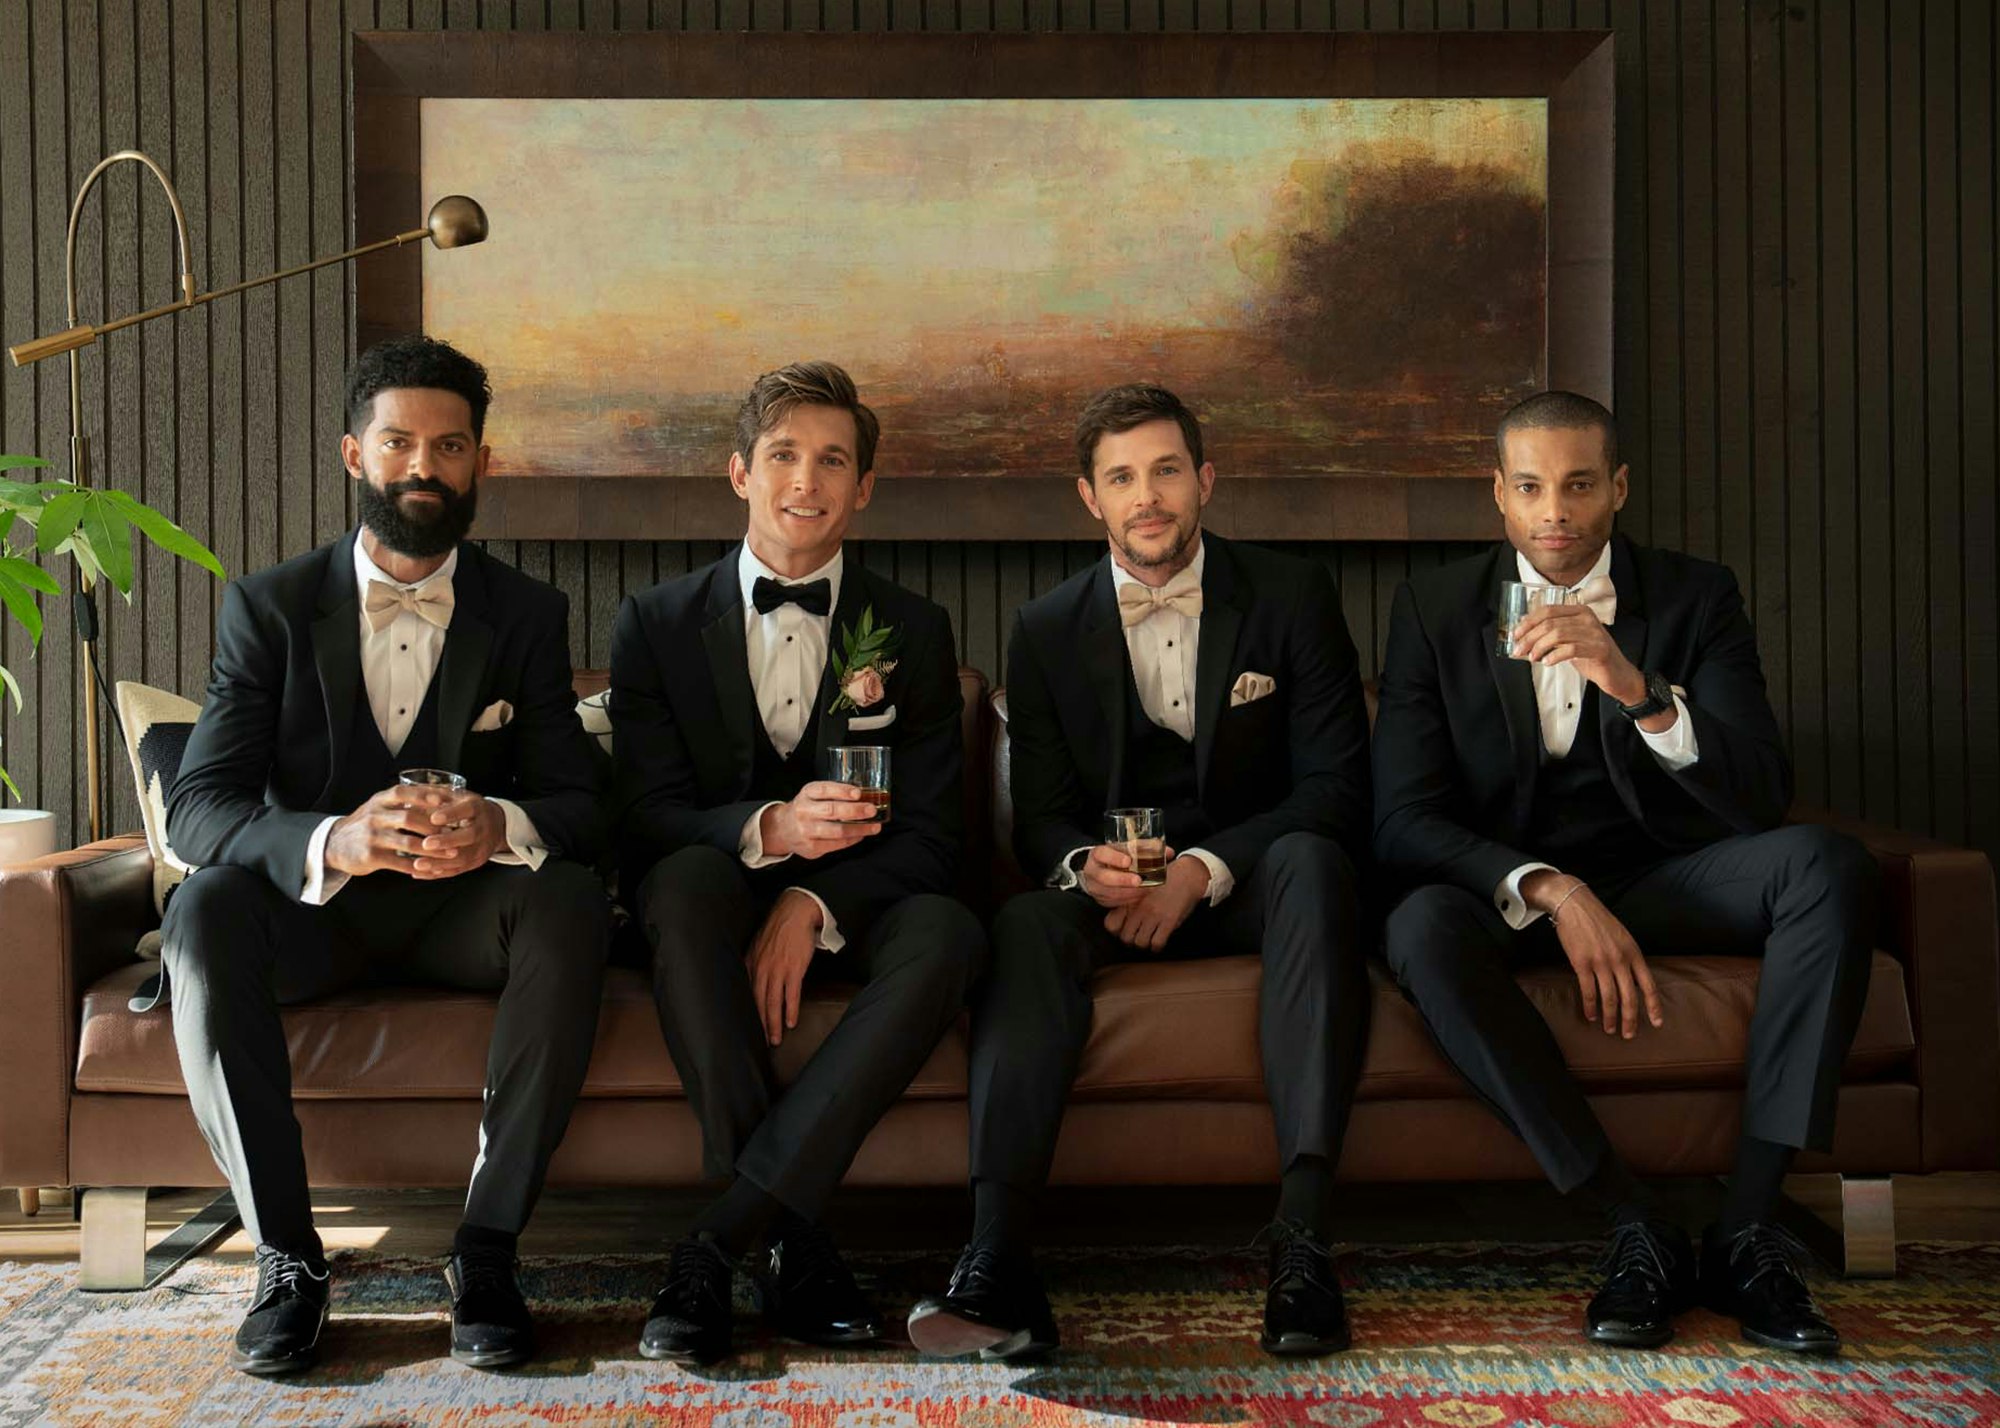 Photo of four groomsmen with drinks on a couch wearing Black Peak Lapel Tuxedos